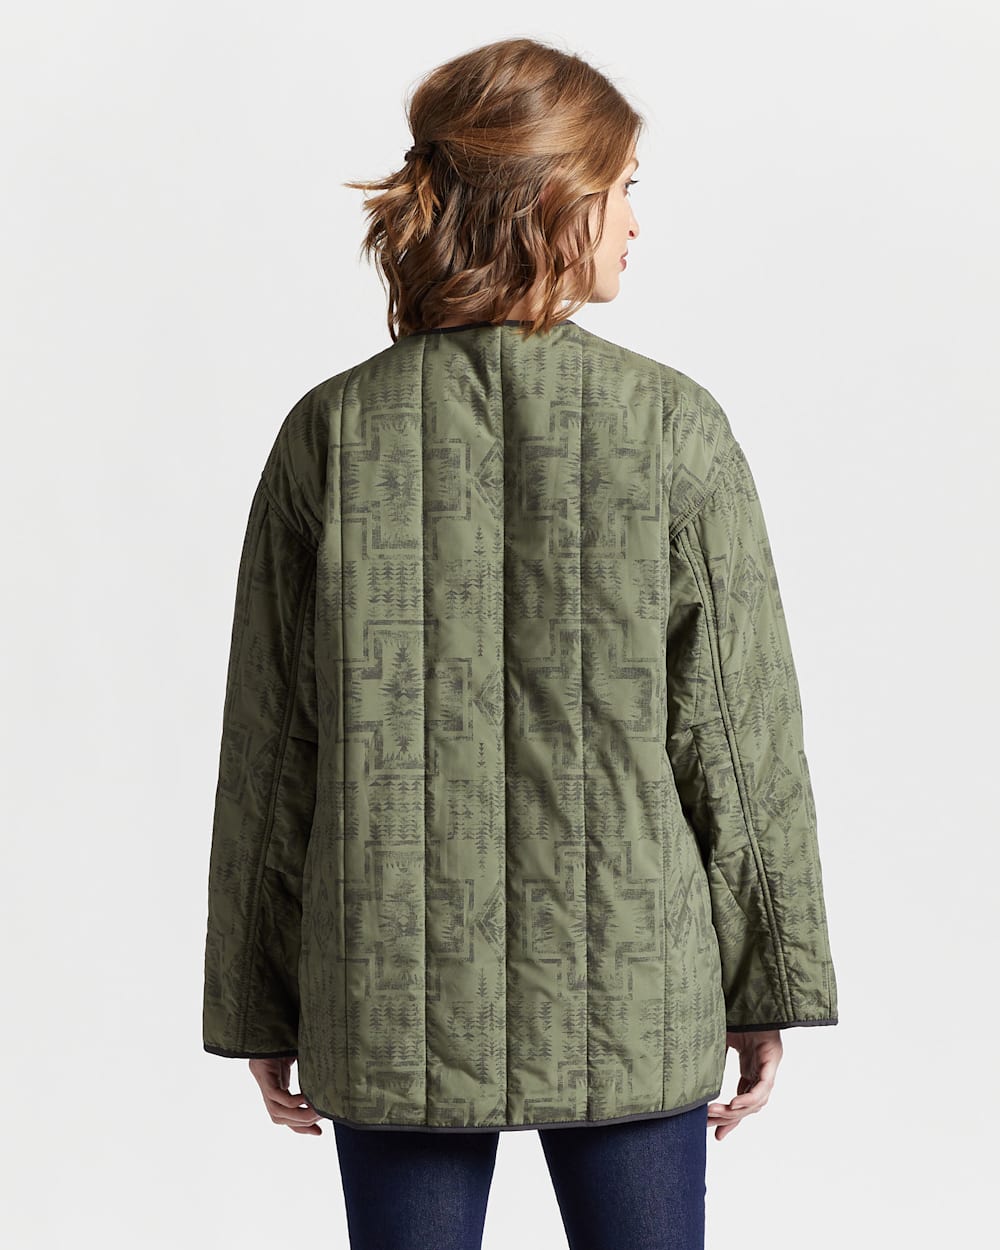 ALTERNATE VIEW OF WOMEN'S REVERSIBLE QUILTED JACKET IN BOTTLE GREEN MULTI/CHARCOAL image number 3